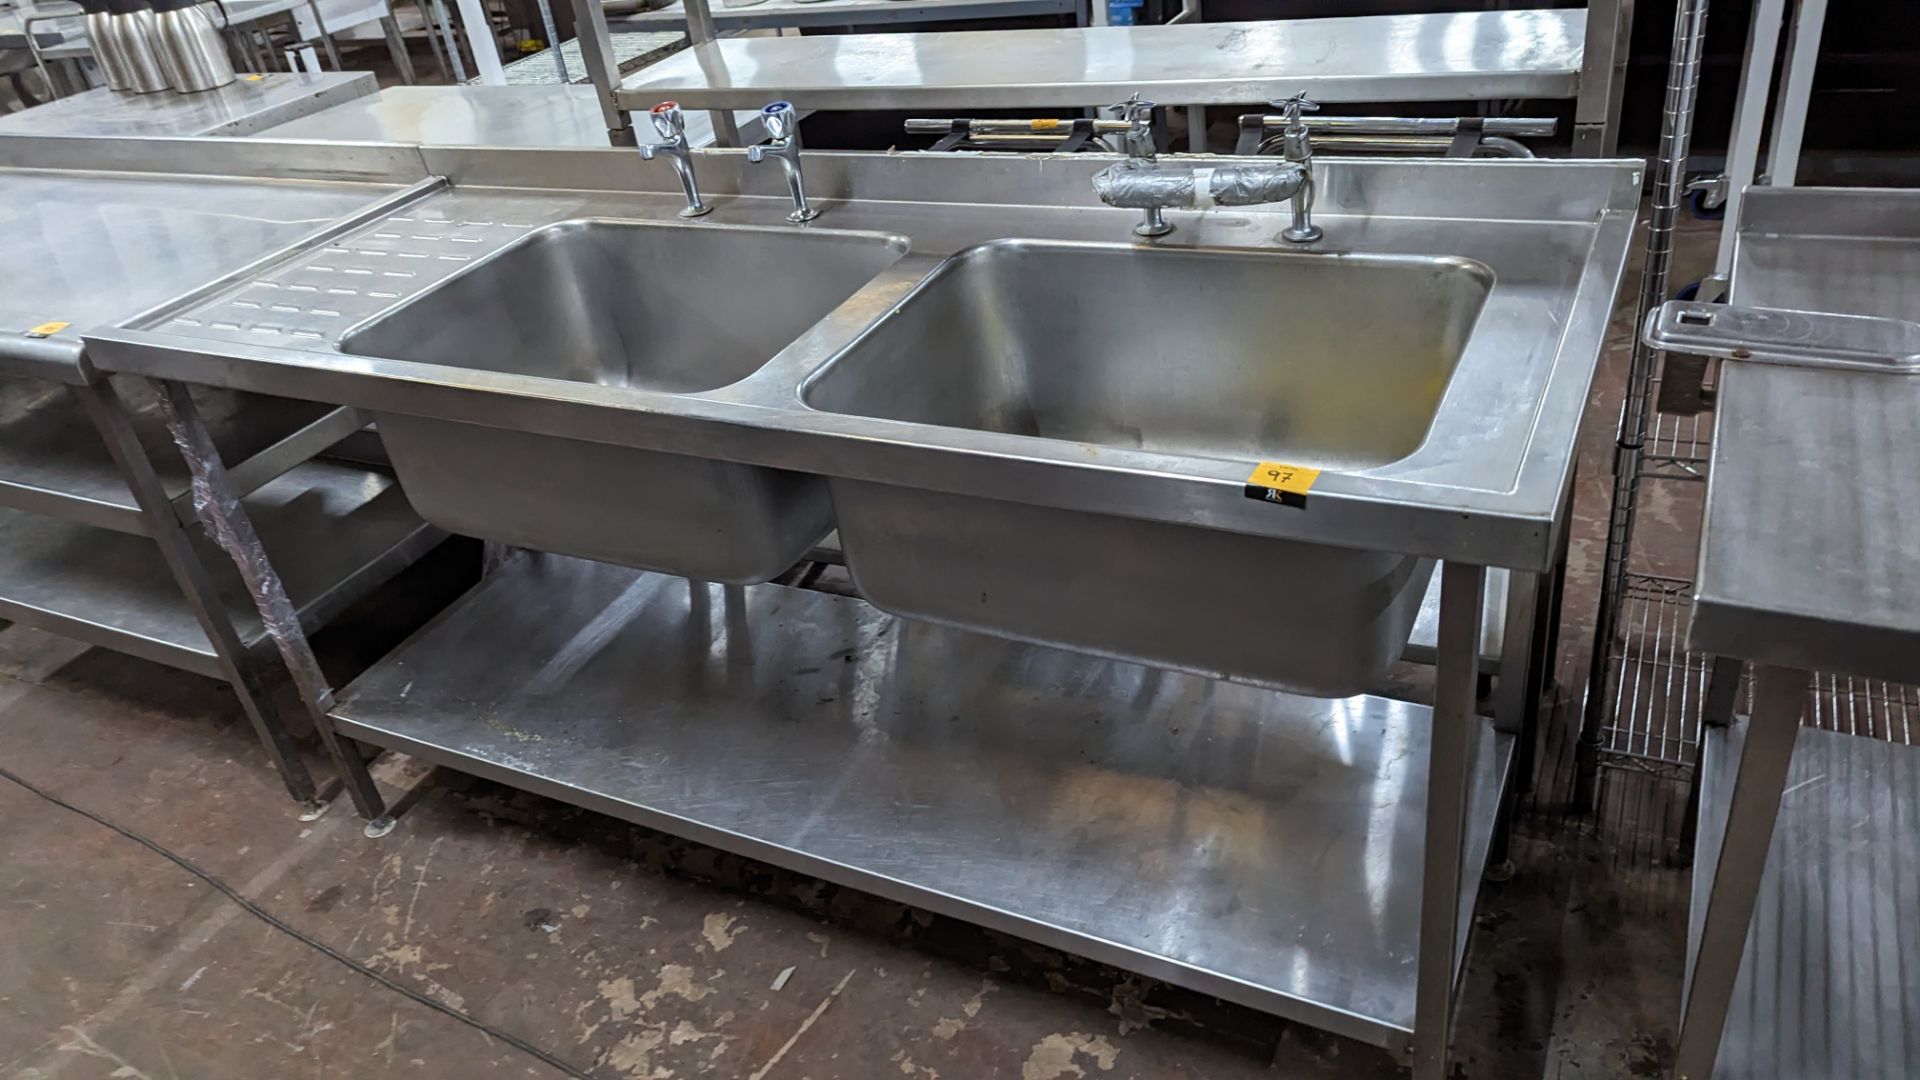 Stainless steel floor standing twin bowl sink arrangement with drainer to the left